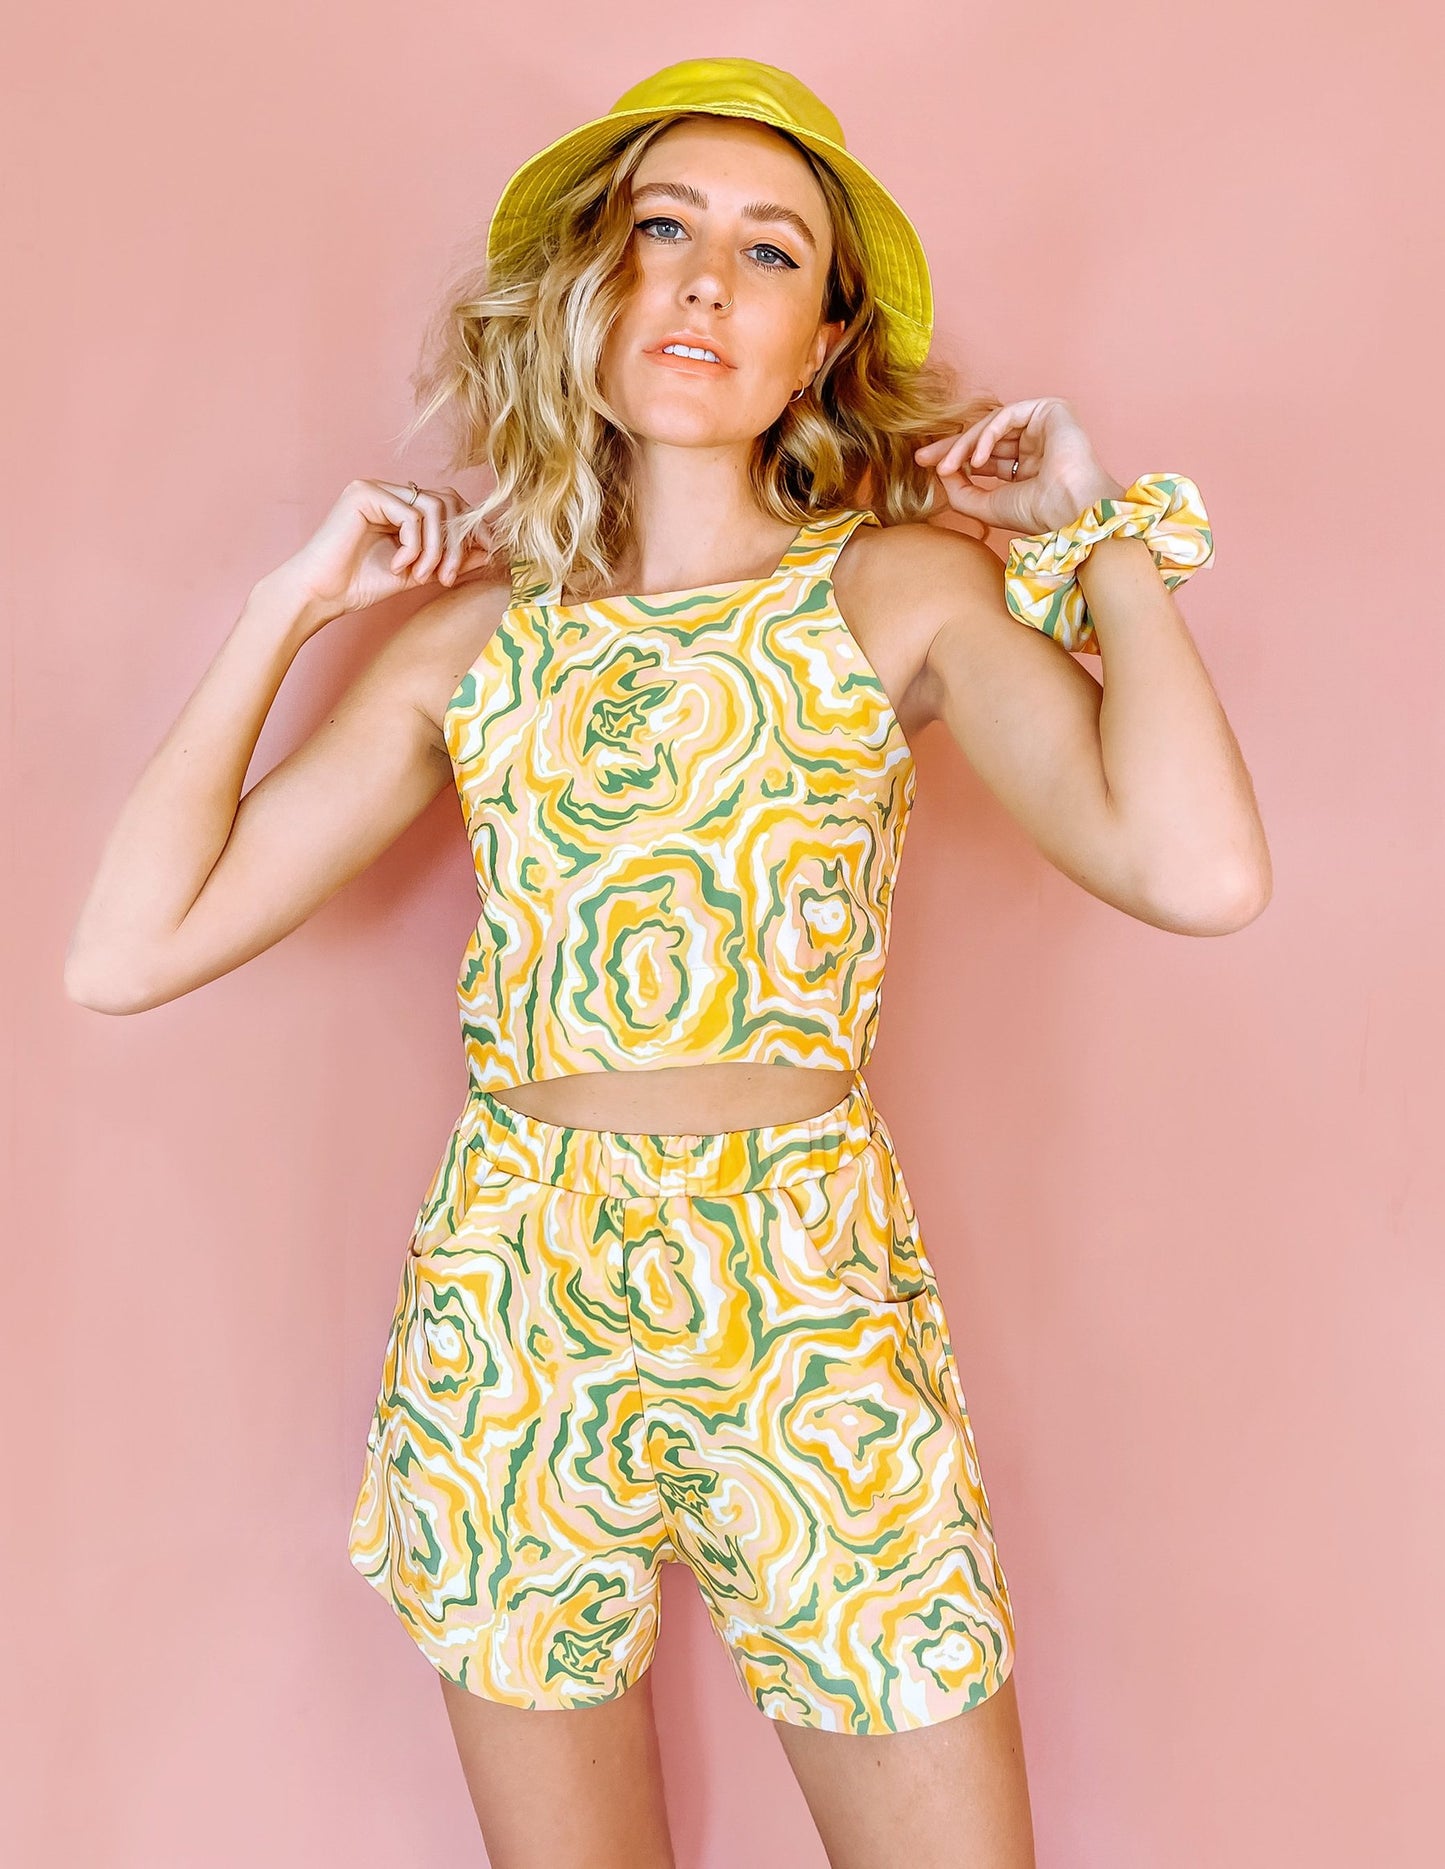 A woman wearing yellow shorts with a green and orange abstract print on it